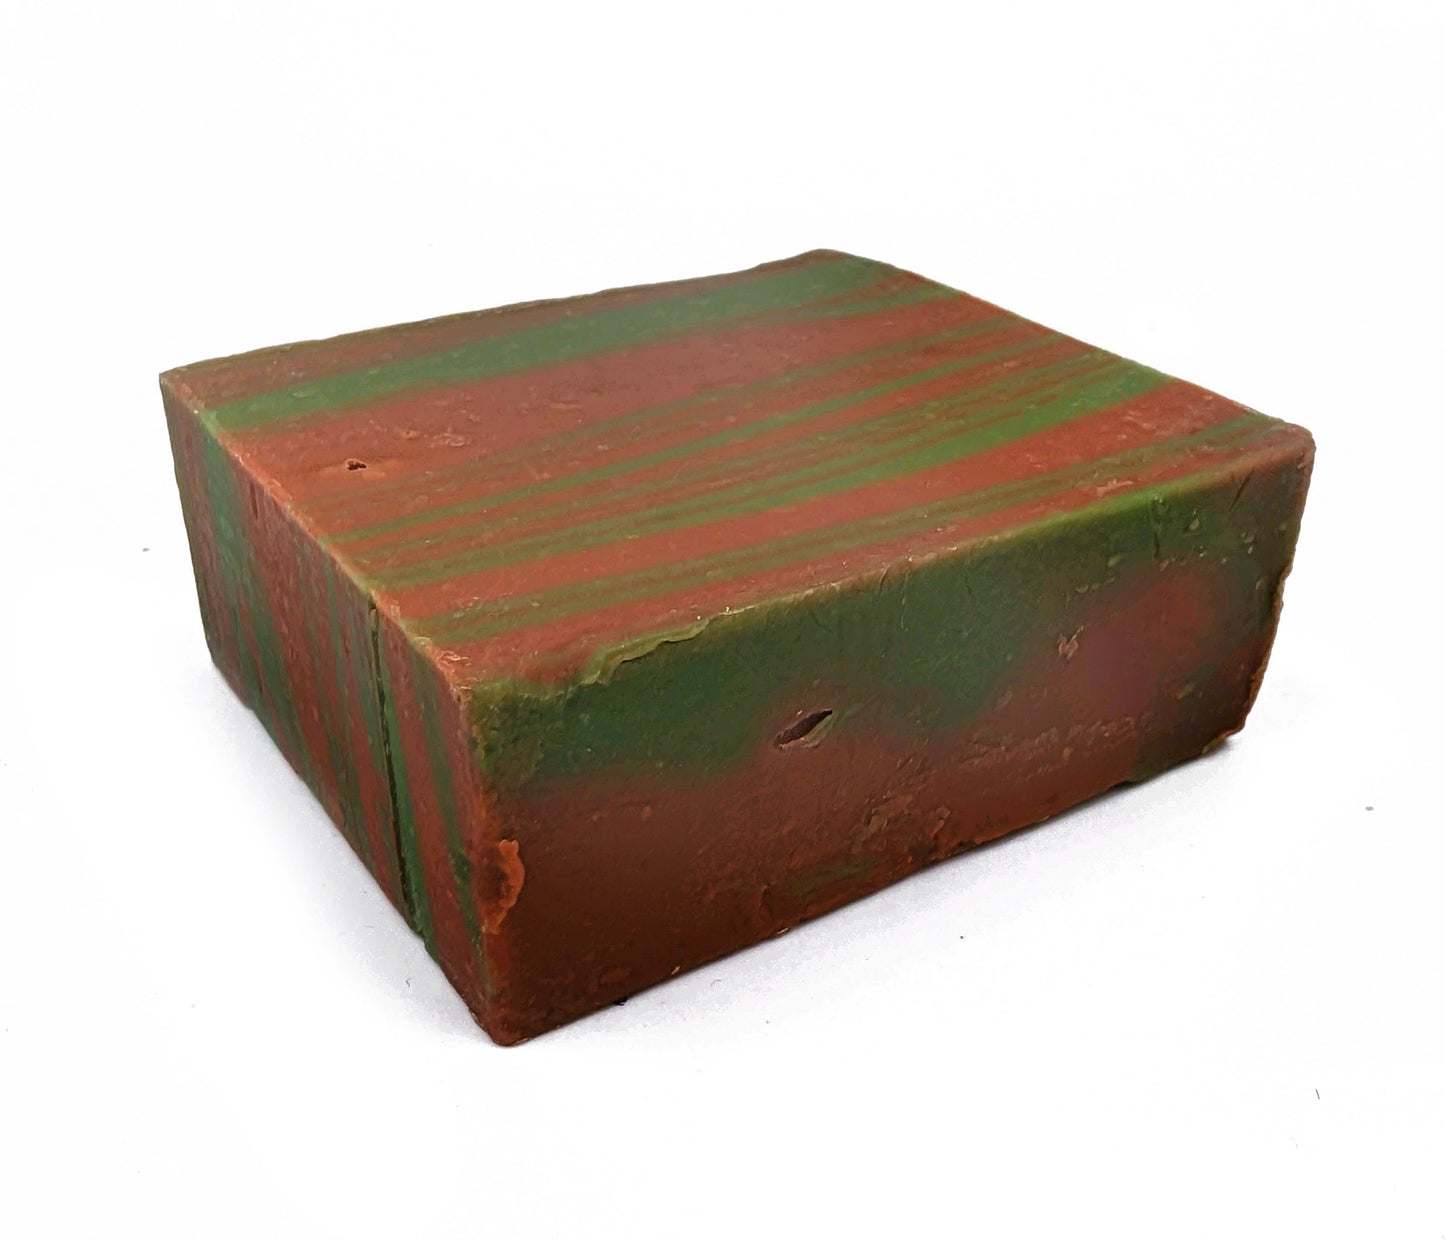 "Fool's Mate" (Oud, Red Leather, Smoked Maple) Bar Soap